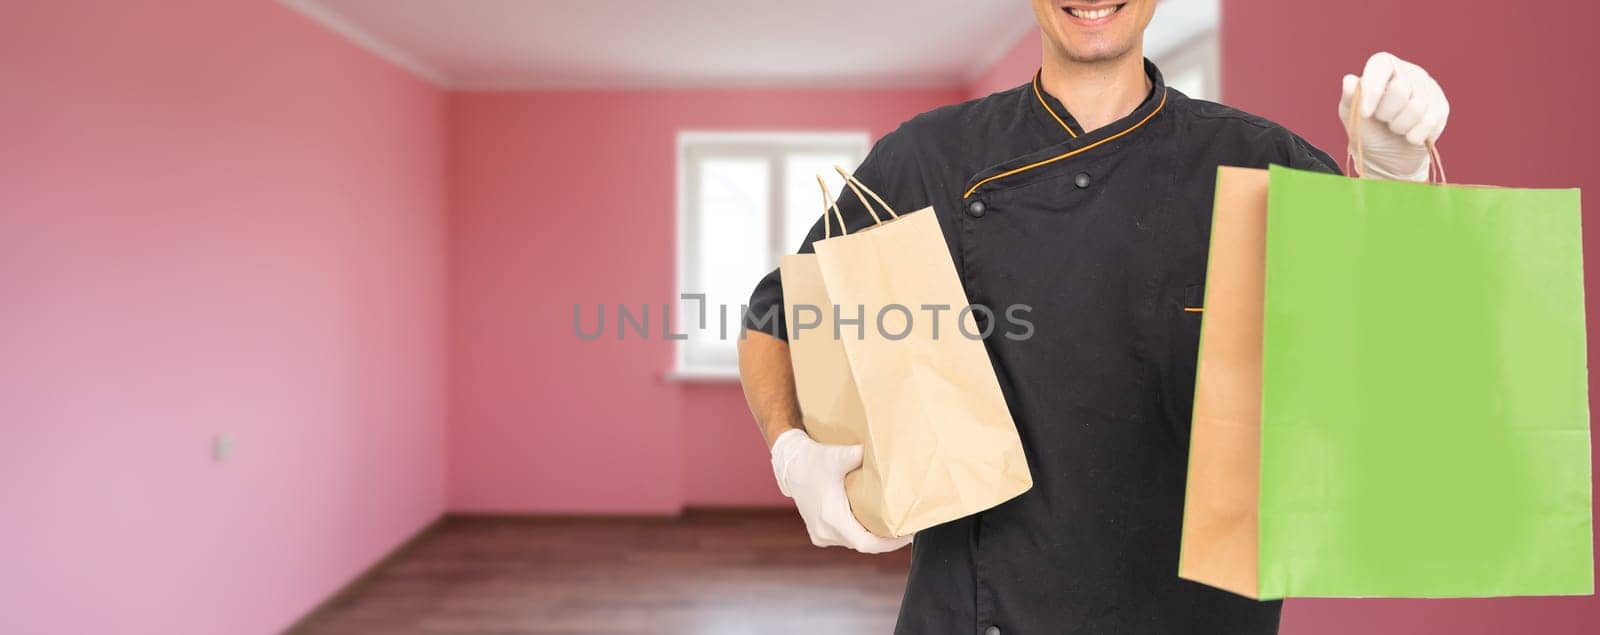 Courier holding paper bags with food, space for text. Delivery service.